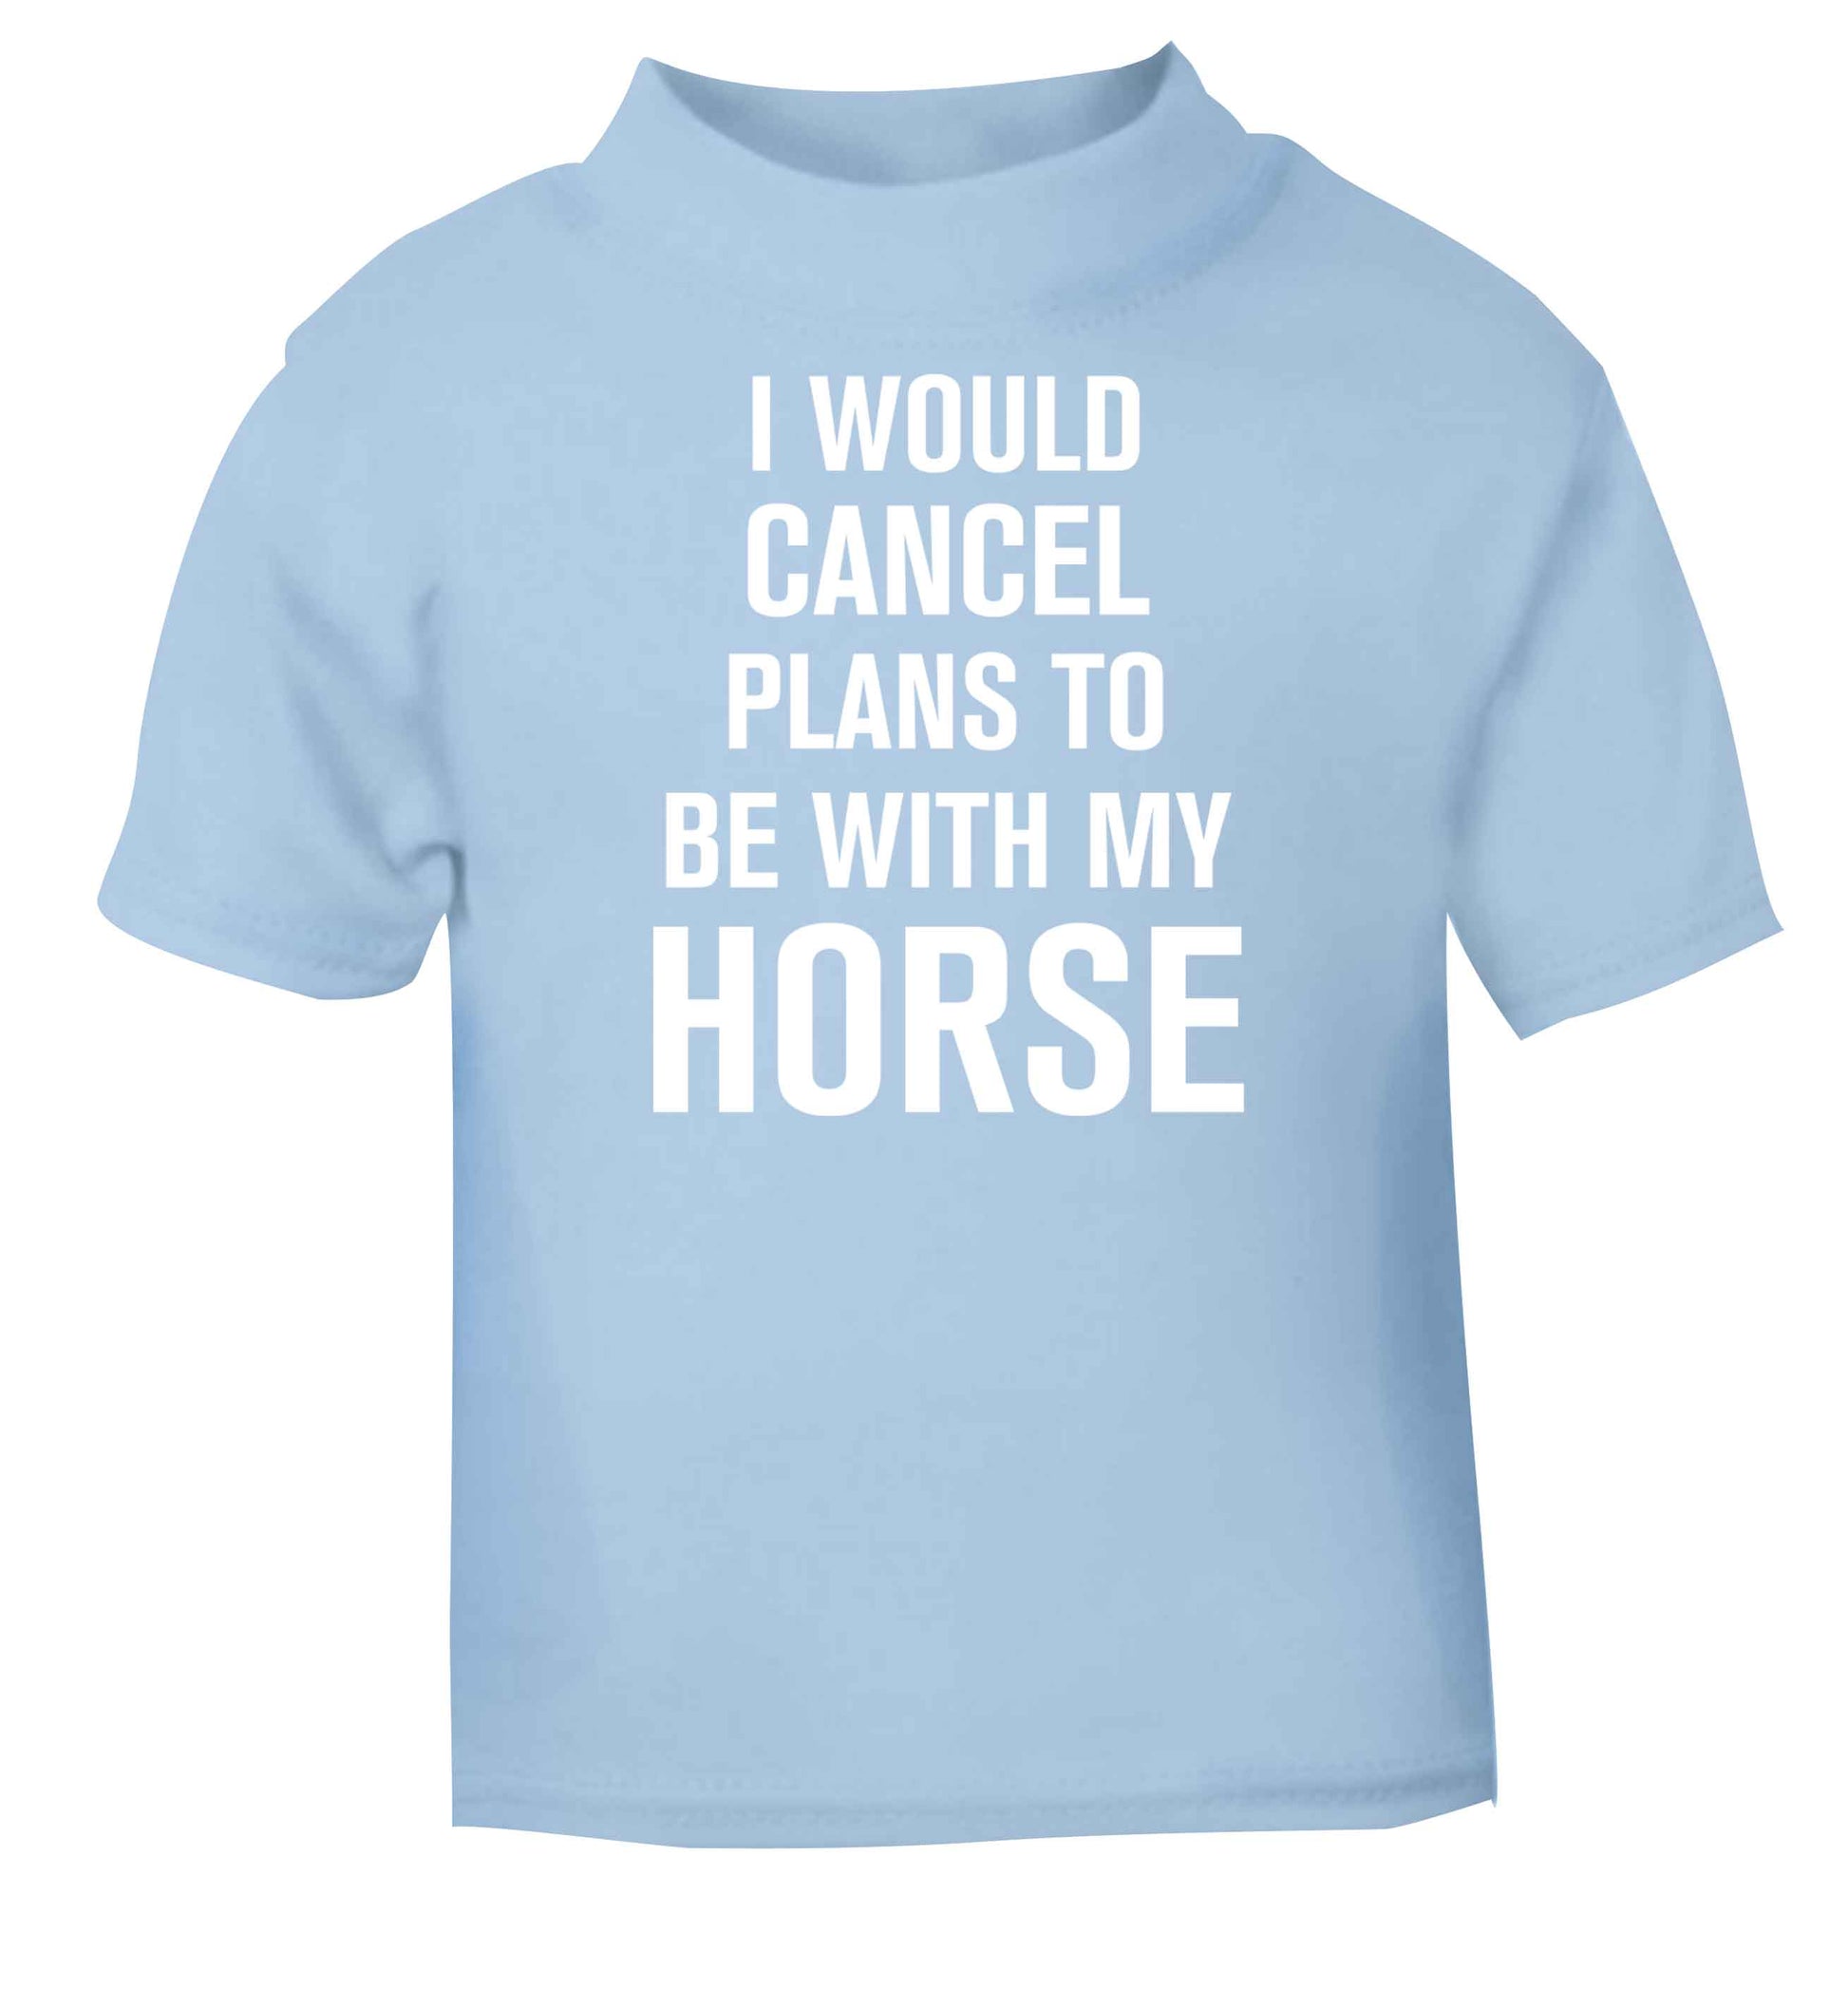 I will cancel plans to be with my horse light blue baby toddler Tshirt 2 Years